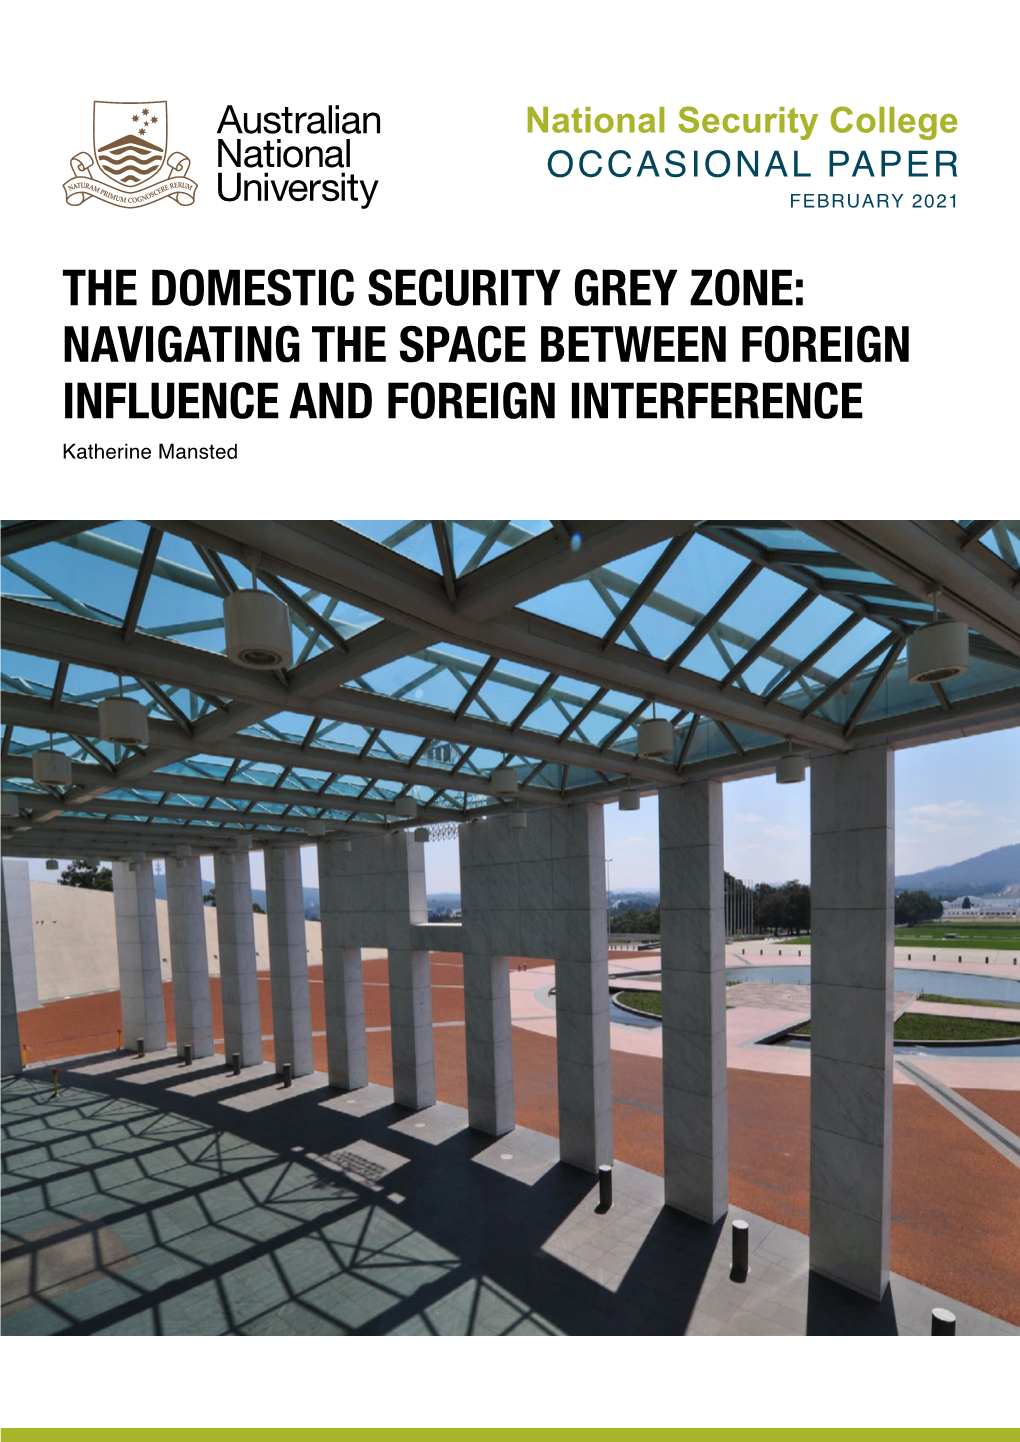 The Domestic Security Grey Zone